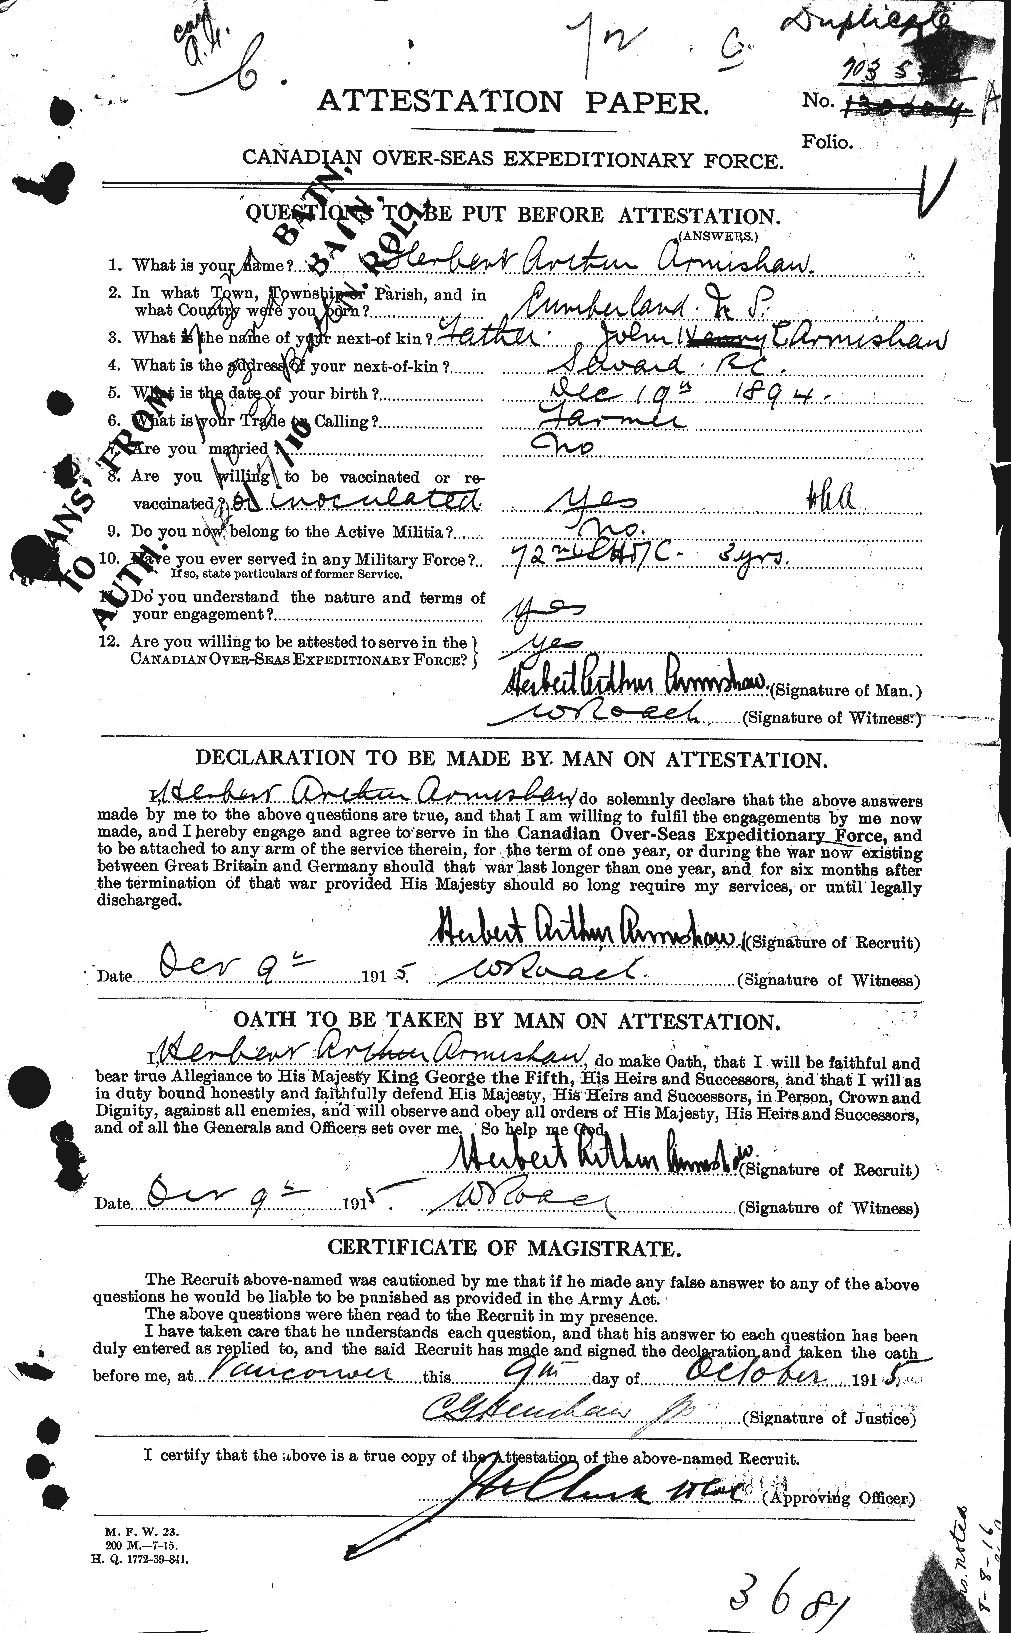 Personnel Records of the First World War - CEF 213470a